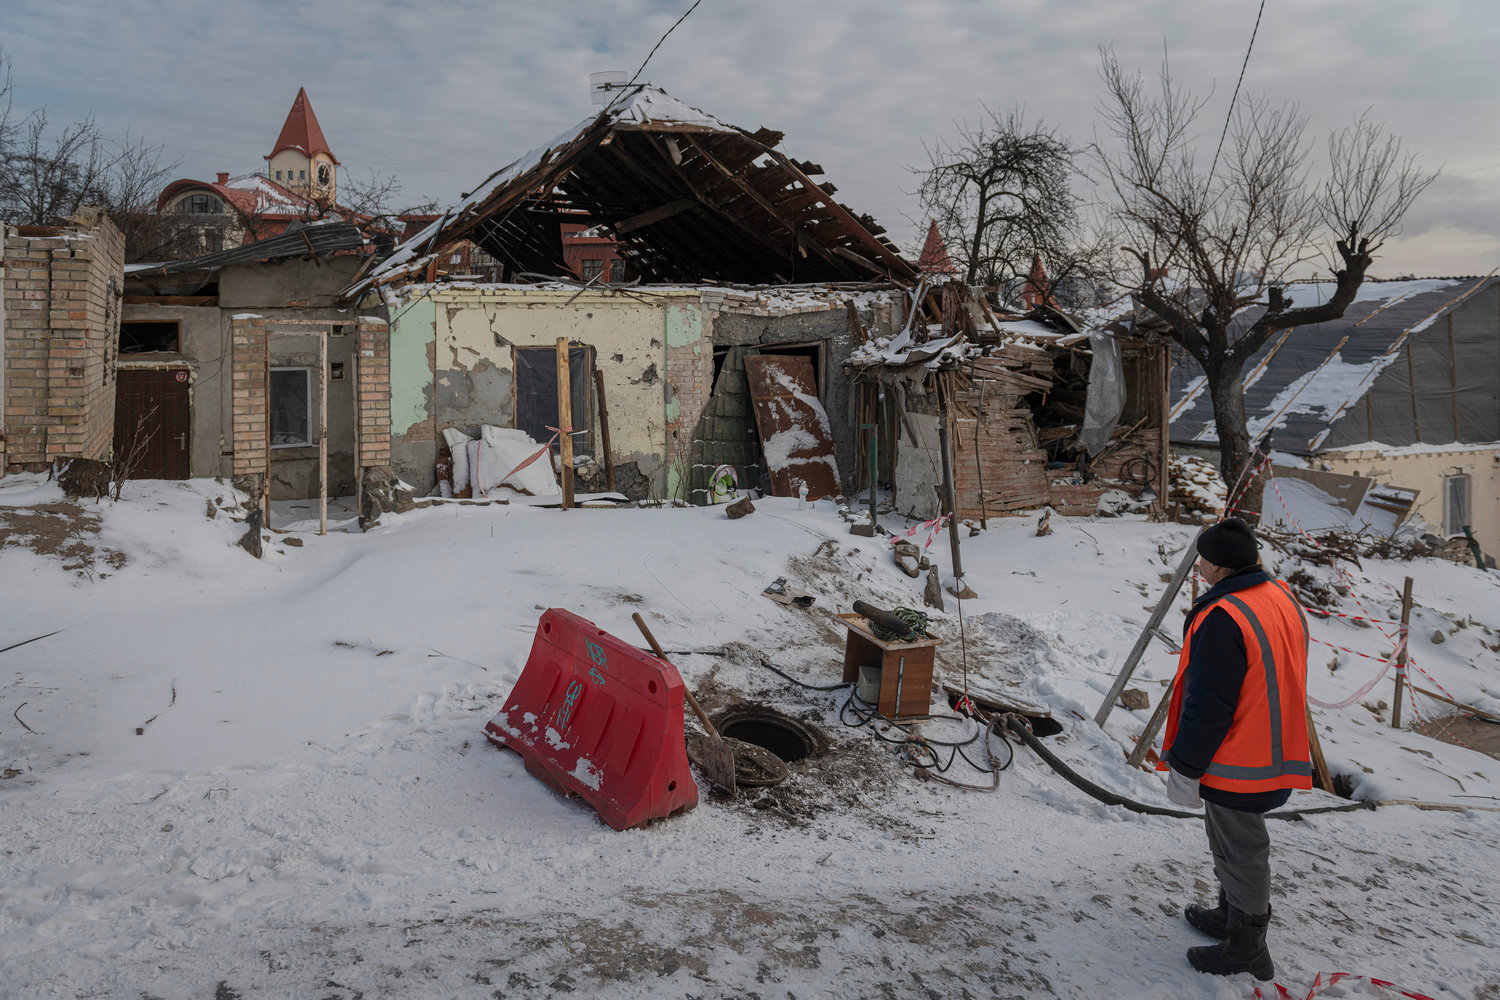 Workers of communal service clear the area near buildings impacted by Russian missile shelling in Kyiv, Ukraine, Wednesday, Jan. 11, 2023.